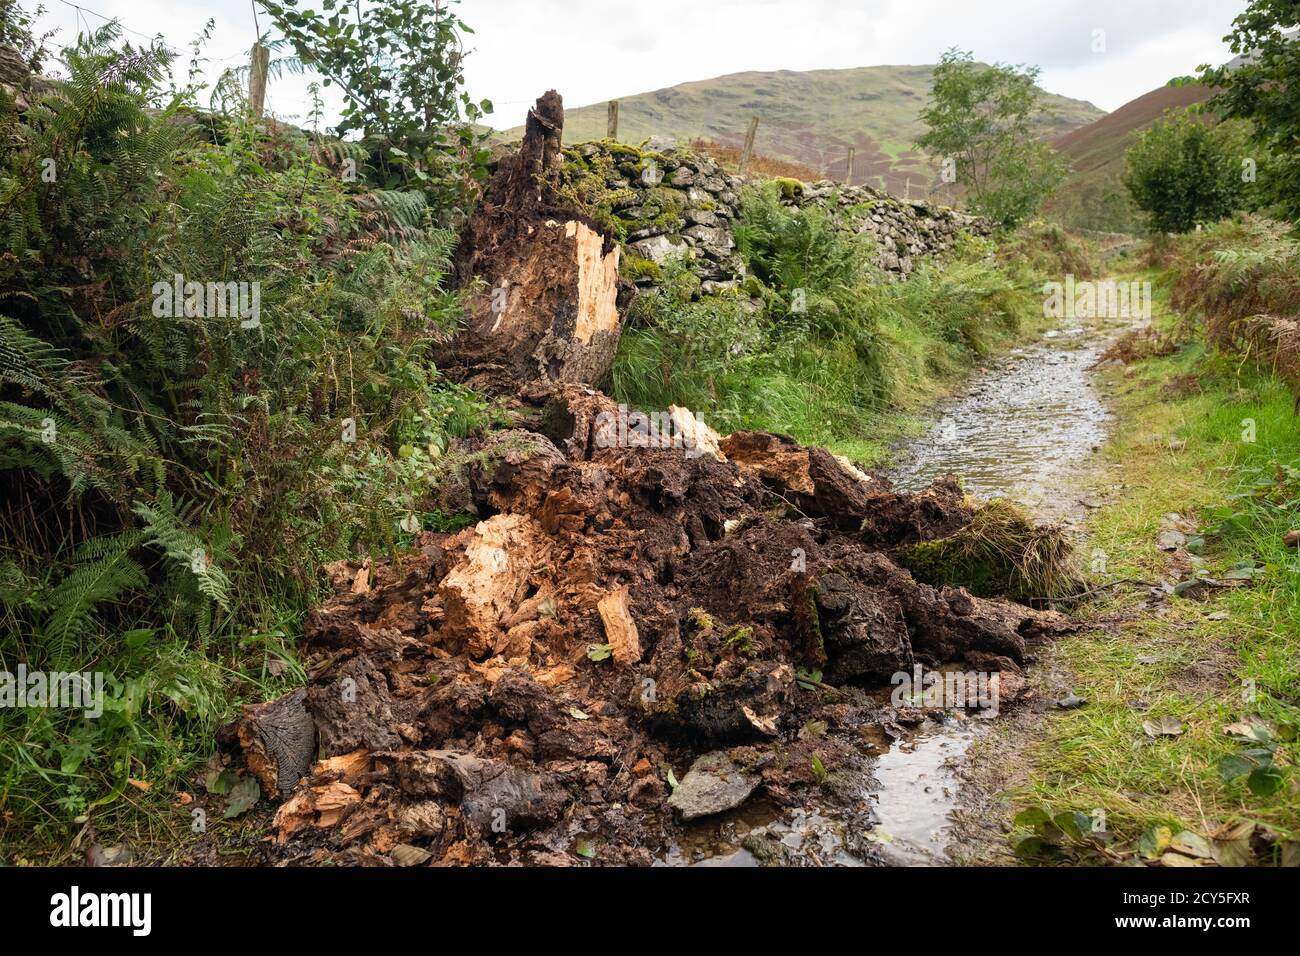 Decaying tree or snag - rotten tree collapsed onto footpath - Lake District, UK Stock Photo